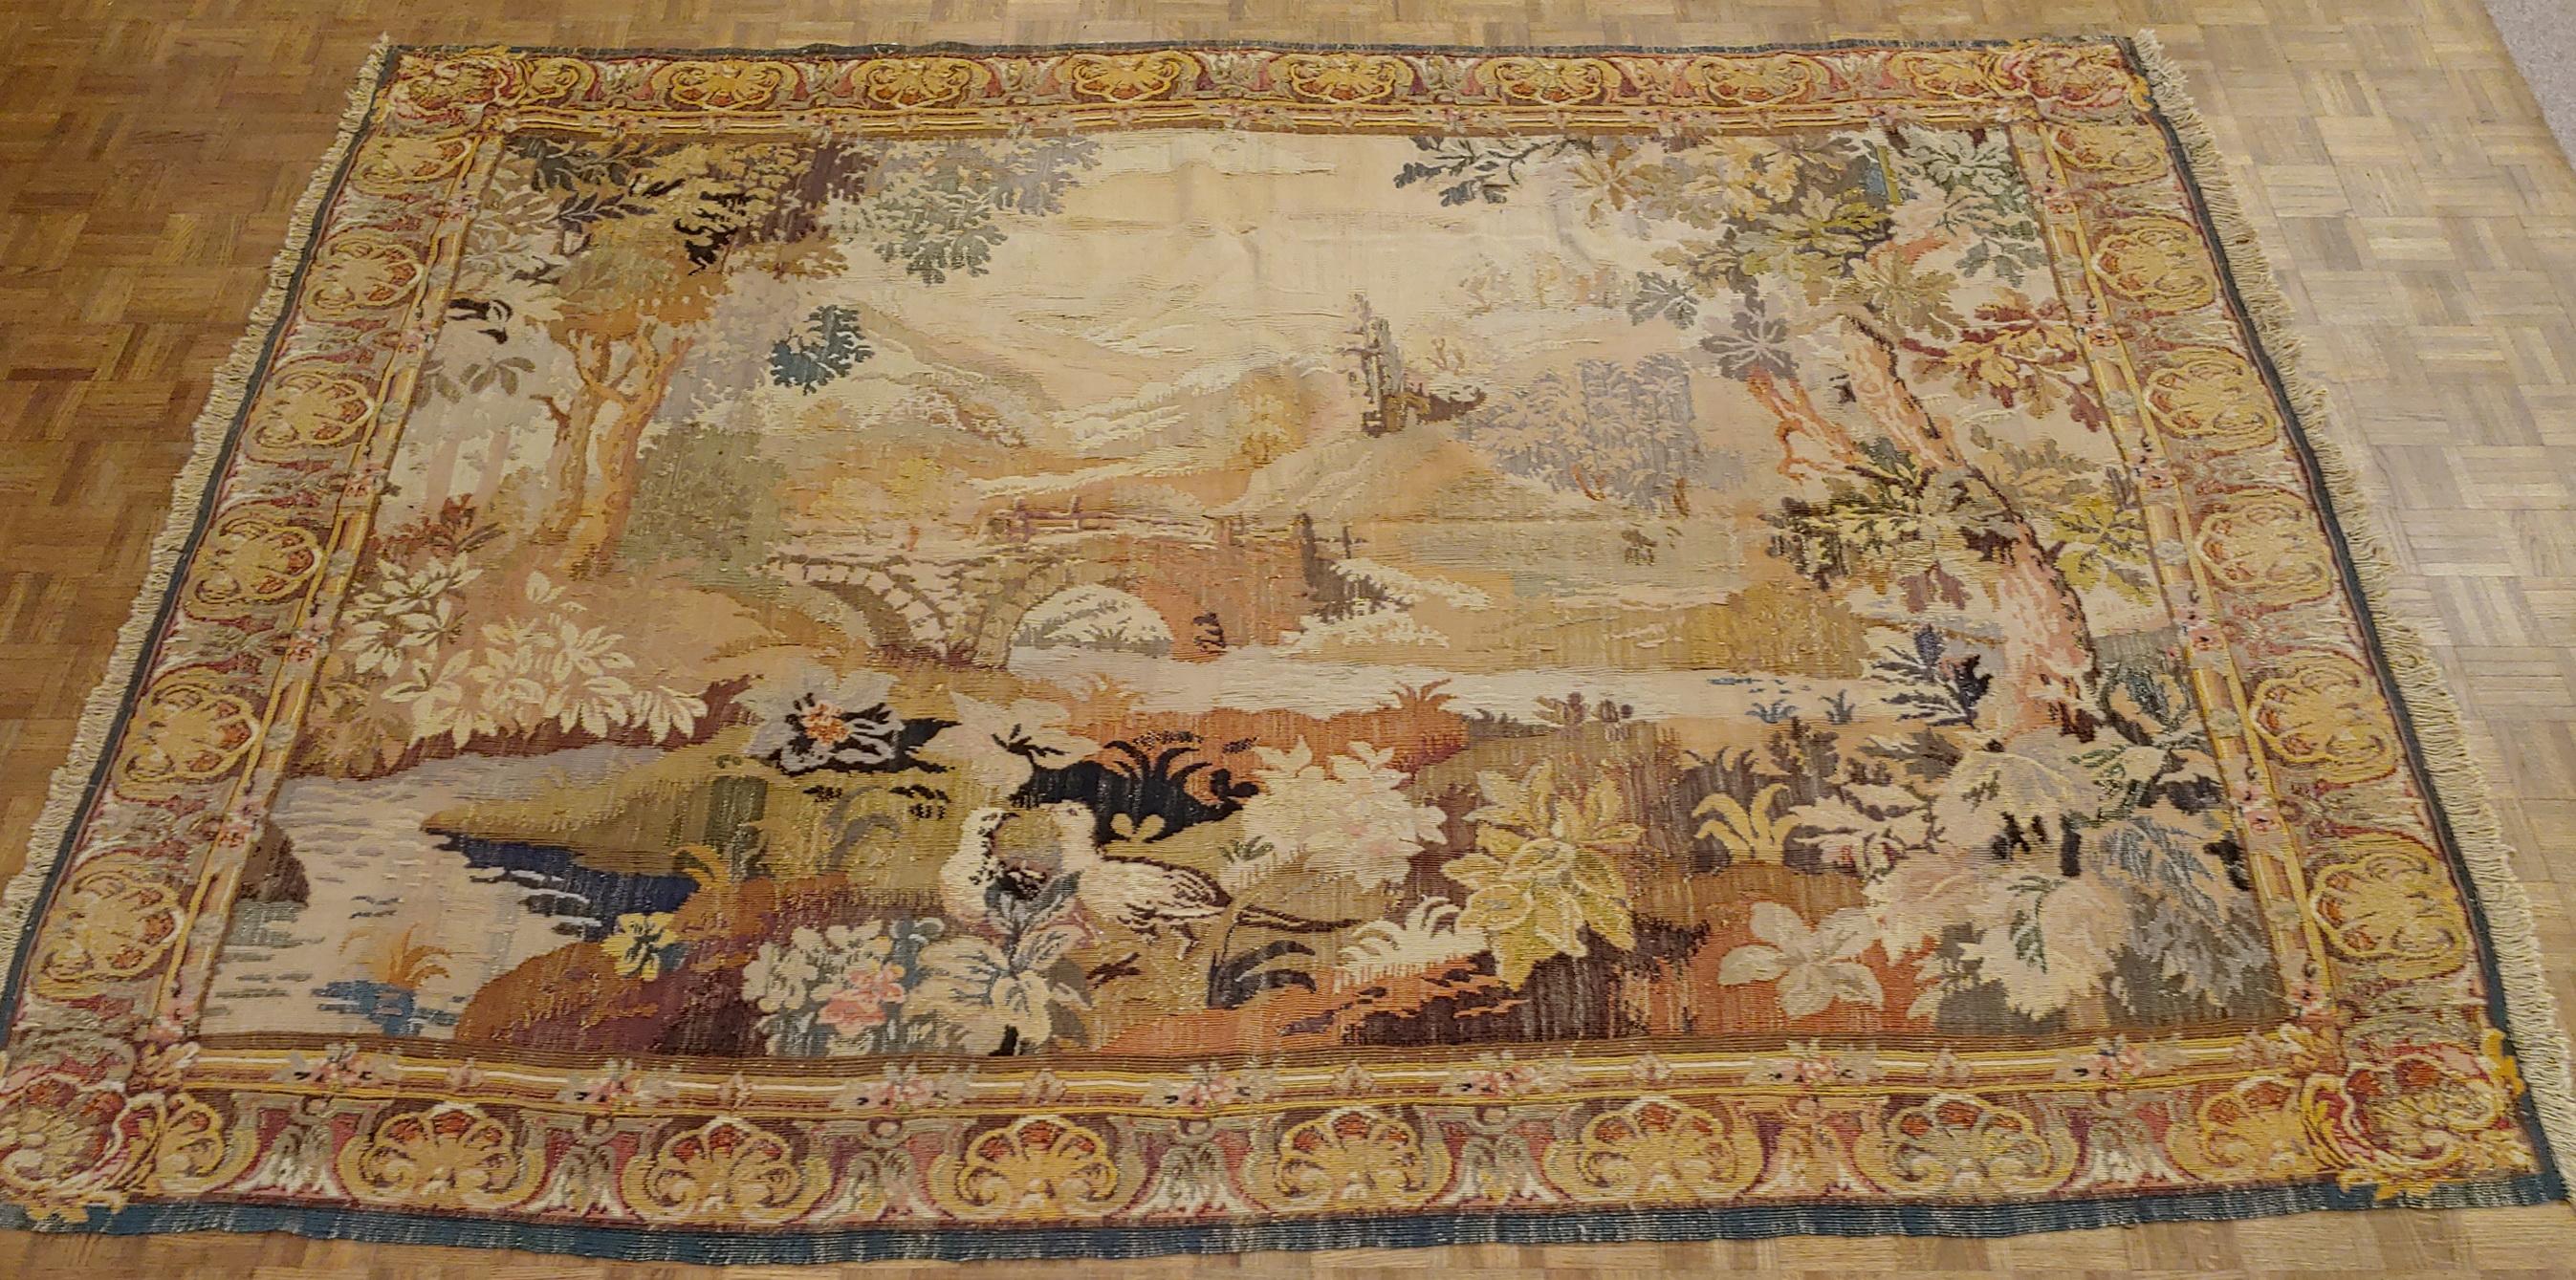 This is an exquisite French loomed tapestry. These tapestries were hand loomed in the early 20th century to compete with the handwoven Aubusson and Flemish tapestries. This forest scene is decorated with a beautiful two doves and mountains in the